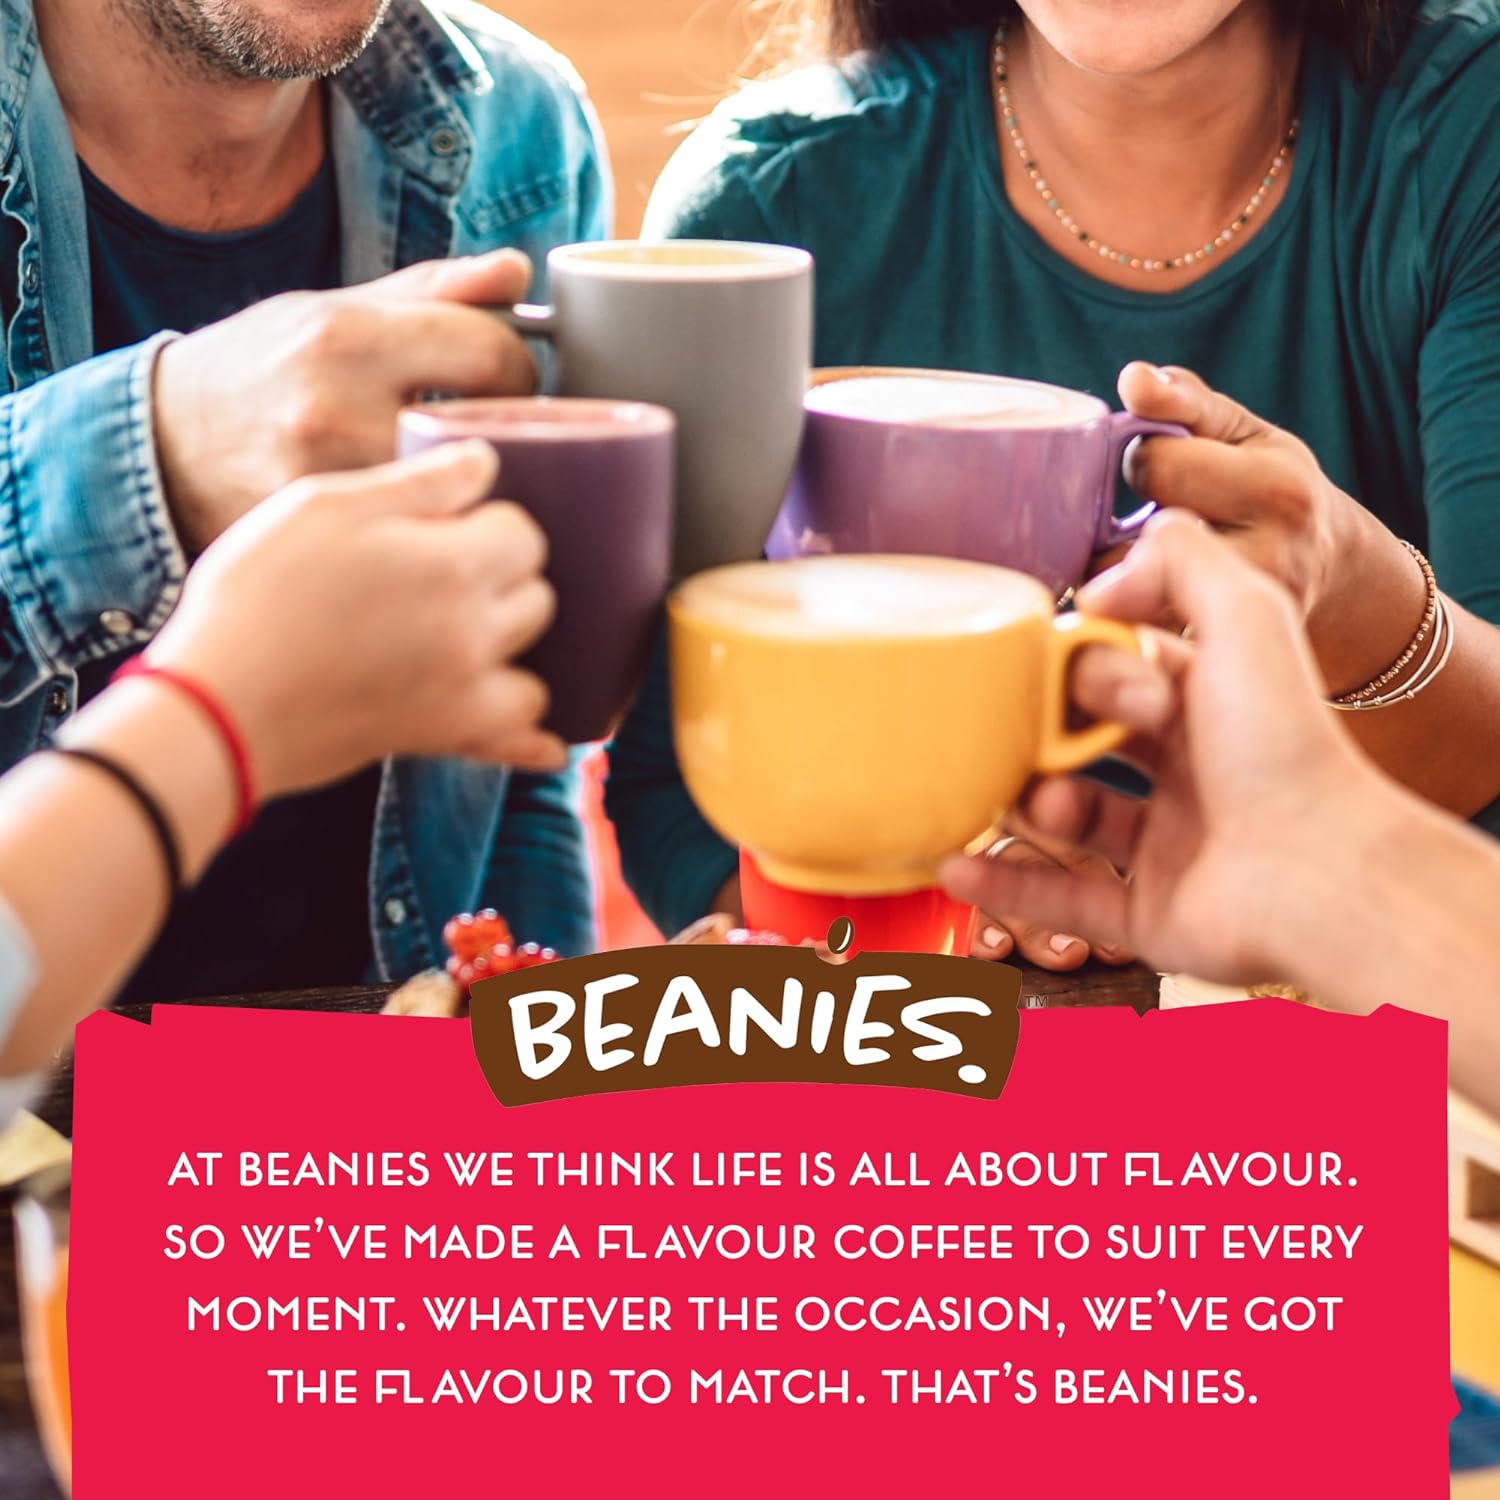 Beanies Flavour Instant Coffee - Creamy Caramel Instant Flavored Coffee - Bold & Adventurous Full-On Flavor - An Indulgent Sugar Free Taste Explosion - Low Calorie - Vegan & Gluten Free - Wheat & Dairy Free, 50g jar : Grocery & Gourmet Food